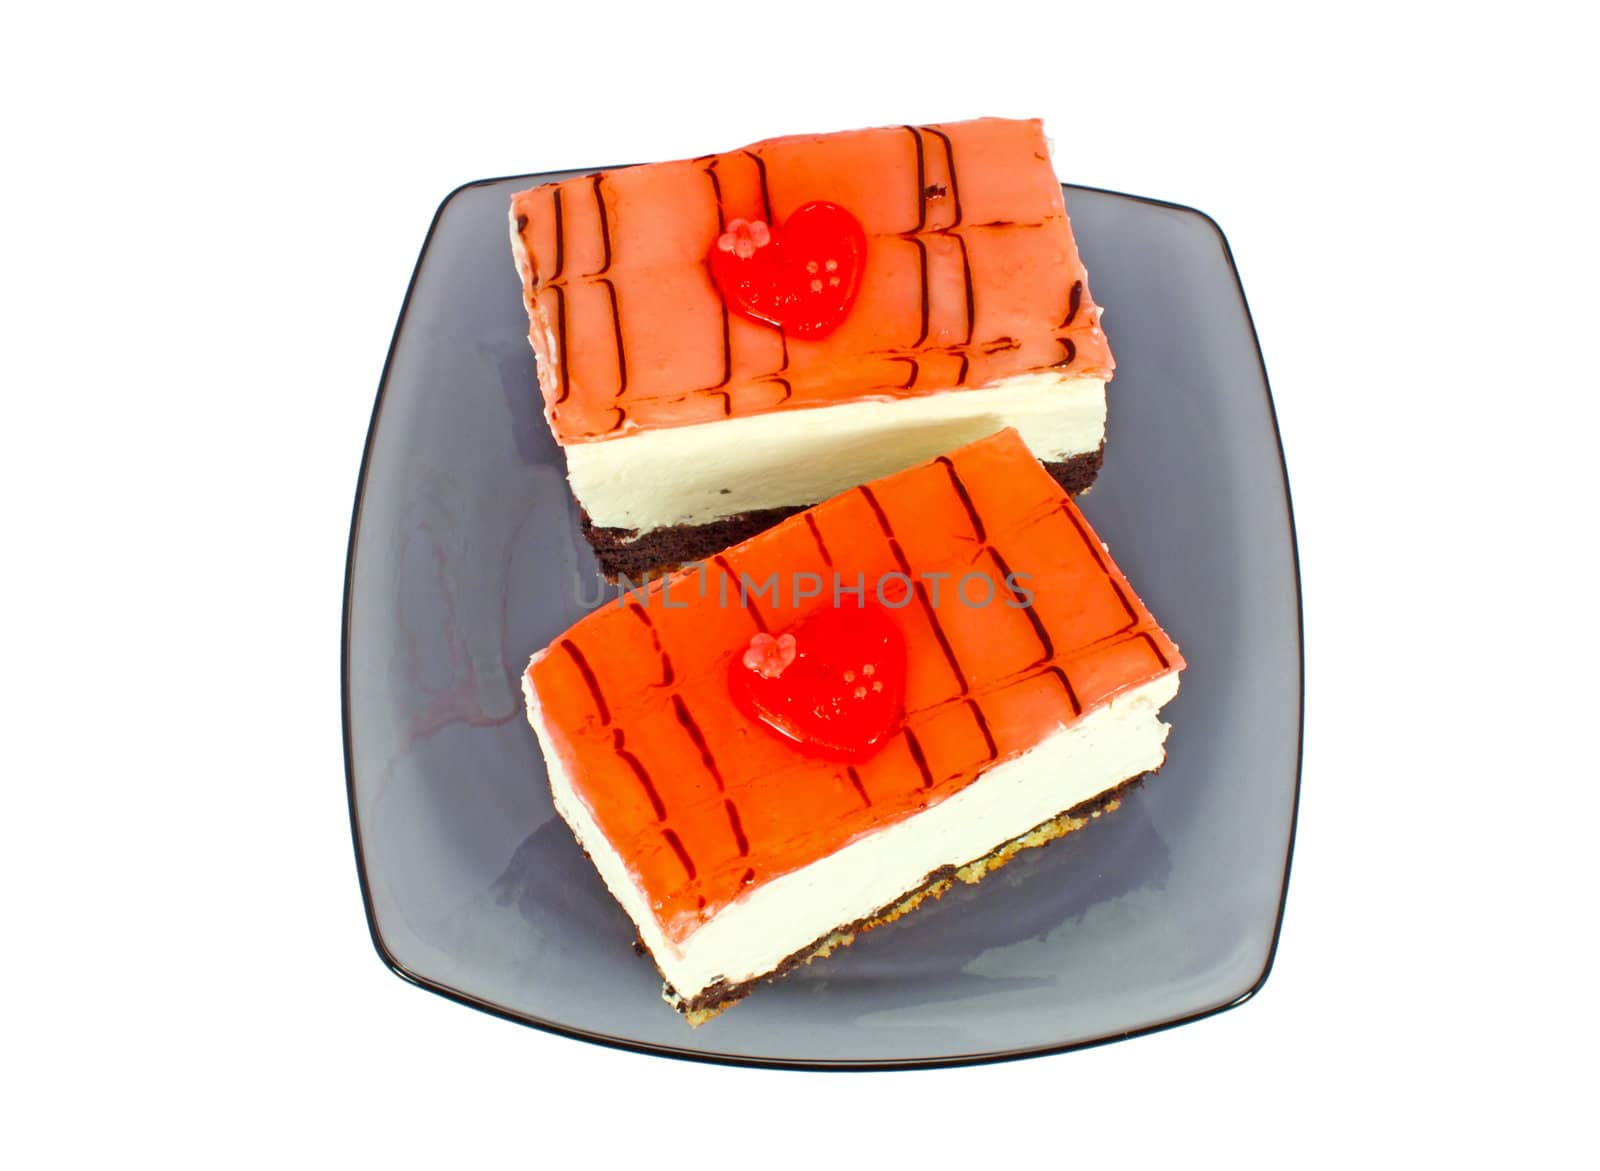 Homemade cakes with red heart on glass plate, isolated on white